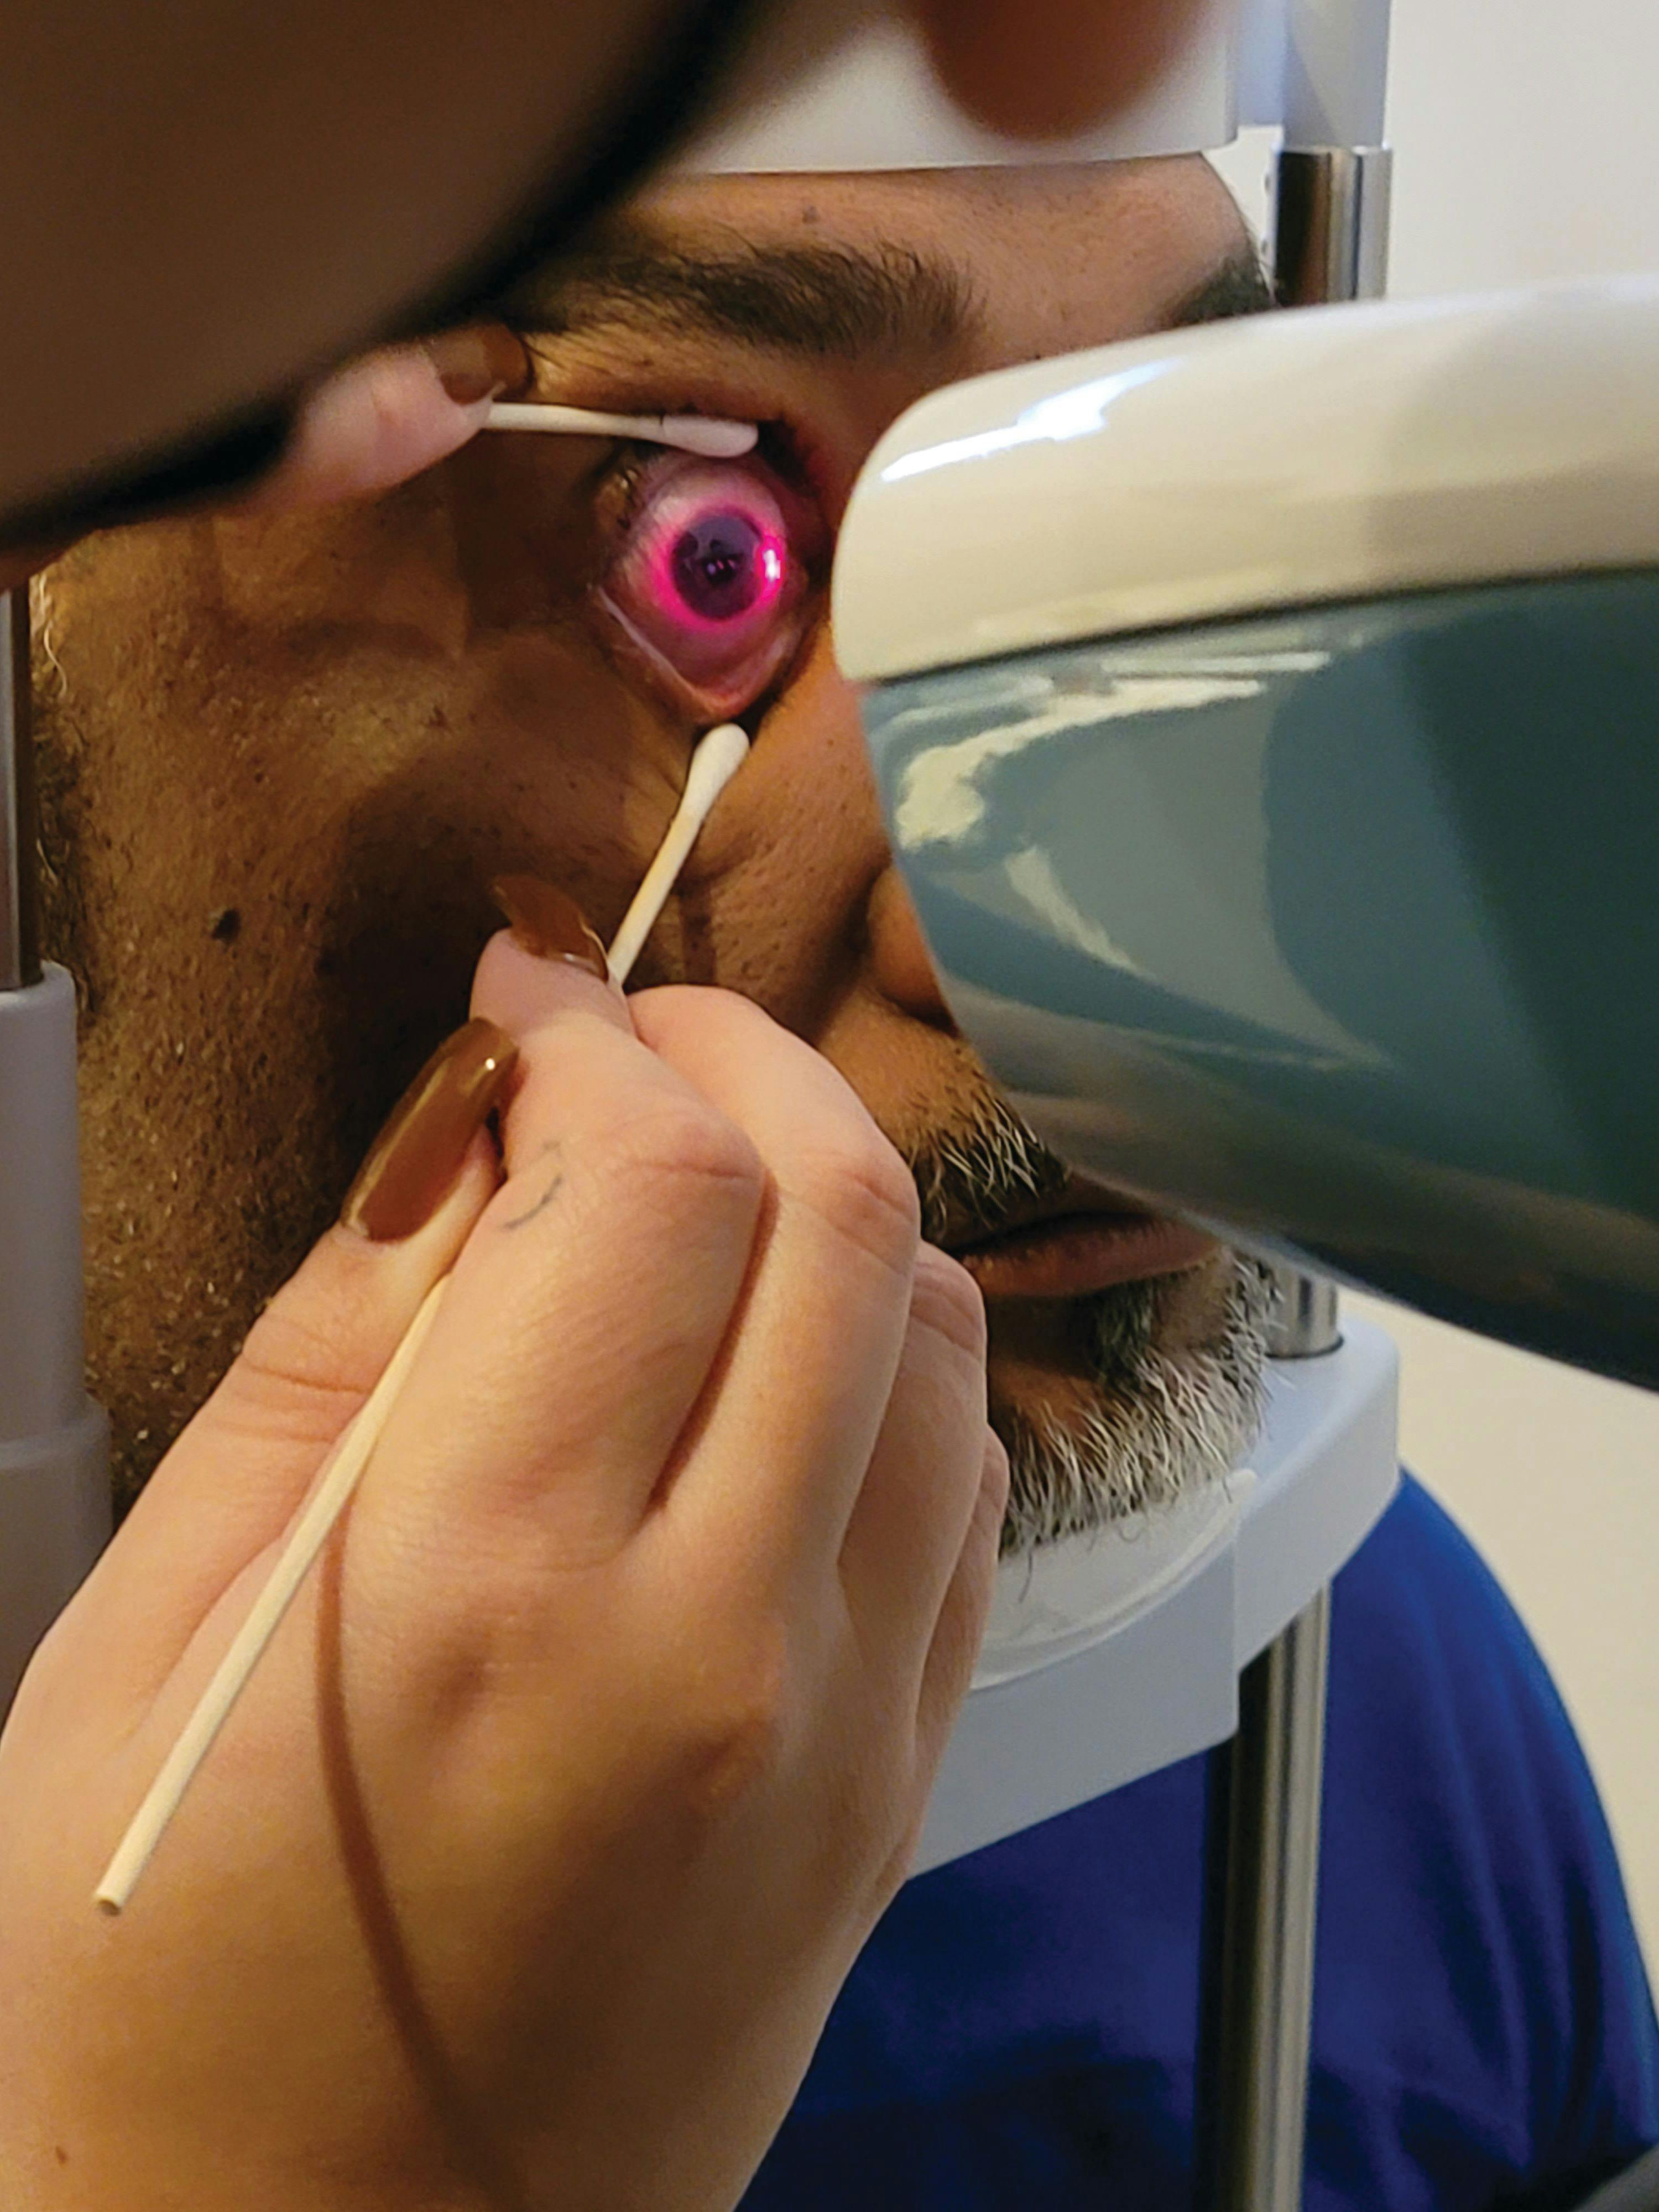 Figure 2. The profilometry method of receiving topographical data about the sclera holds valuable information for initial lens selection because it instantly provides sagittal height and a detailed description of the sclera. 